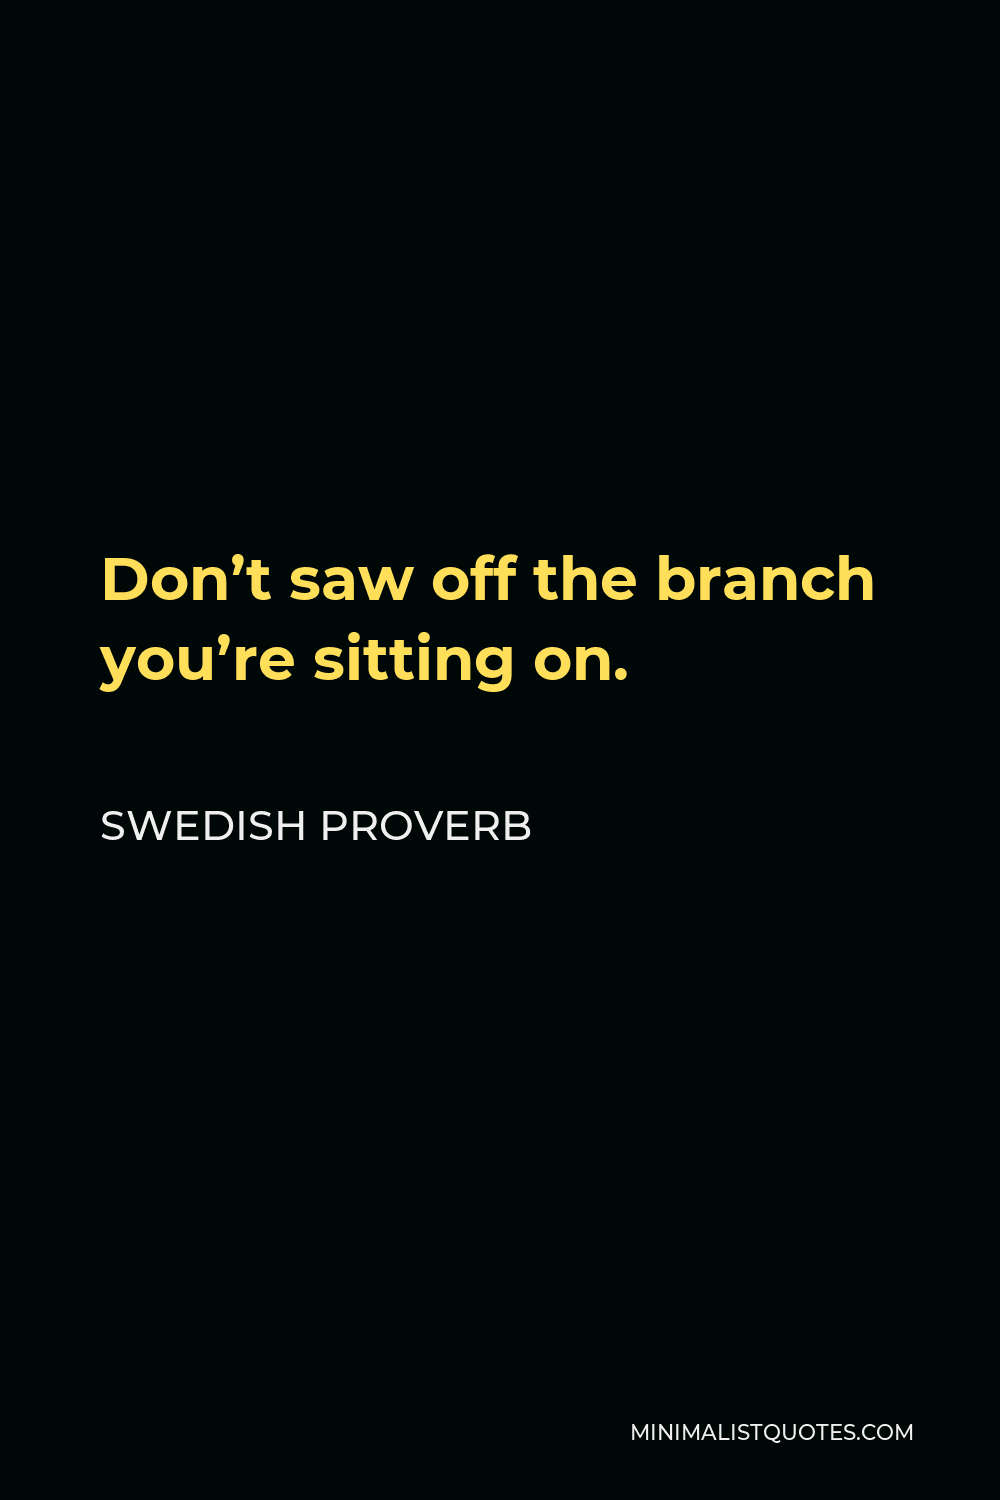 Swedish Proverb Quote - Don’t saw off the branch you’re sitting on.